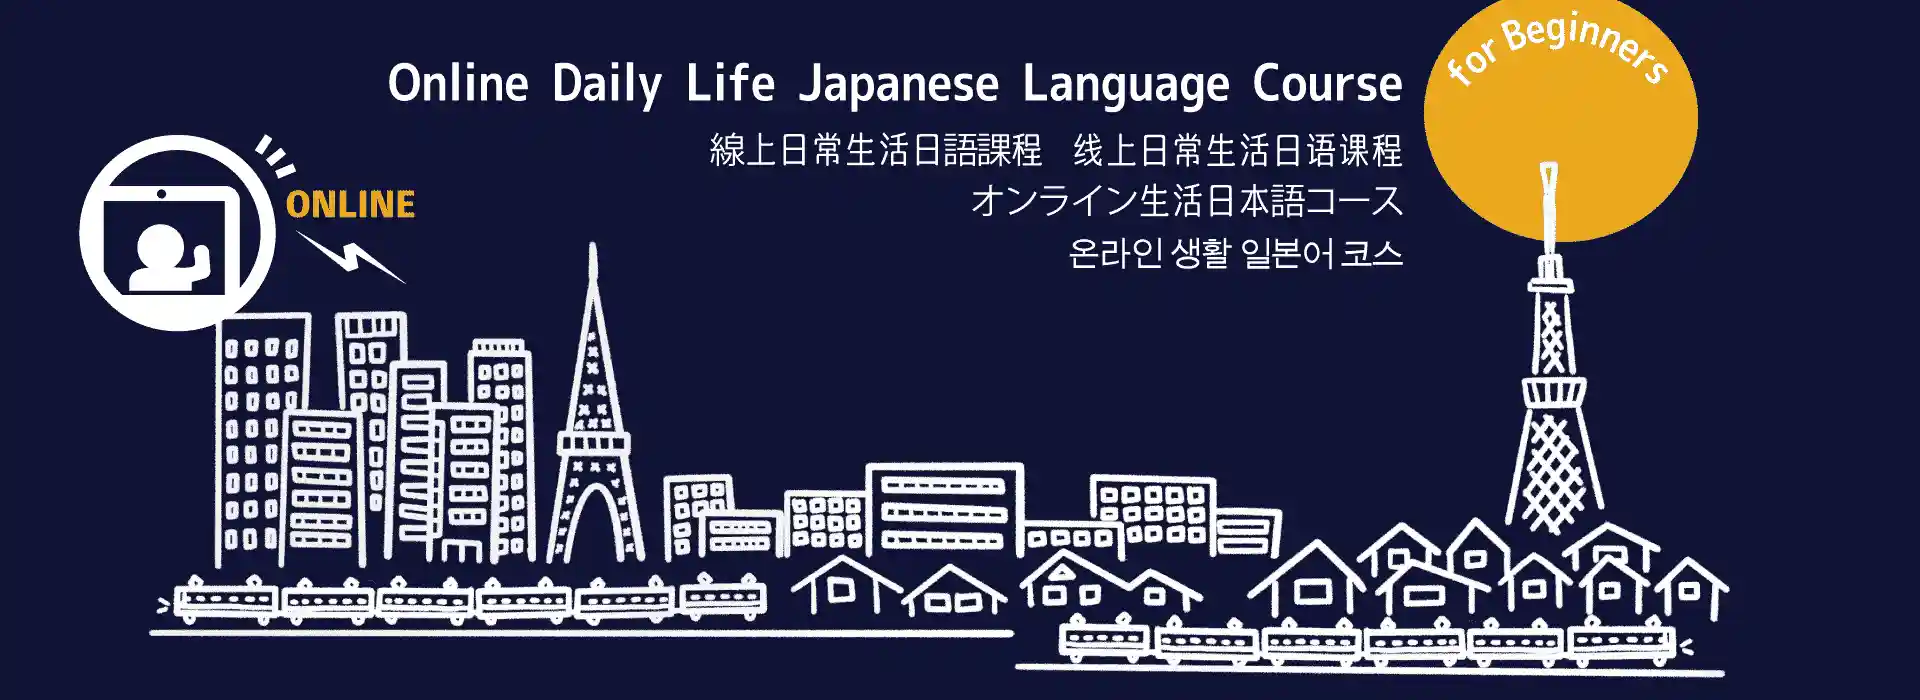 Online Daily Life Japanese Language Course for Beginners